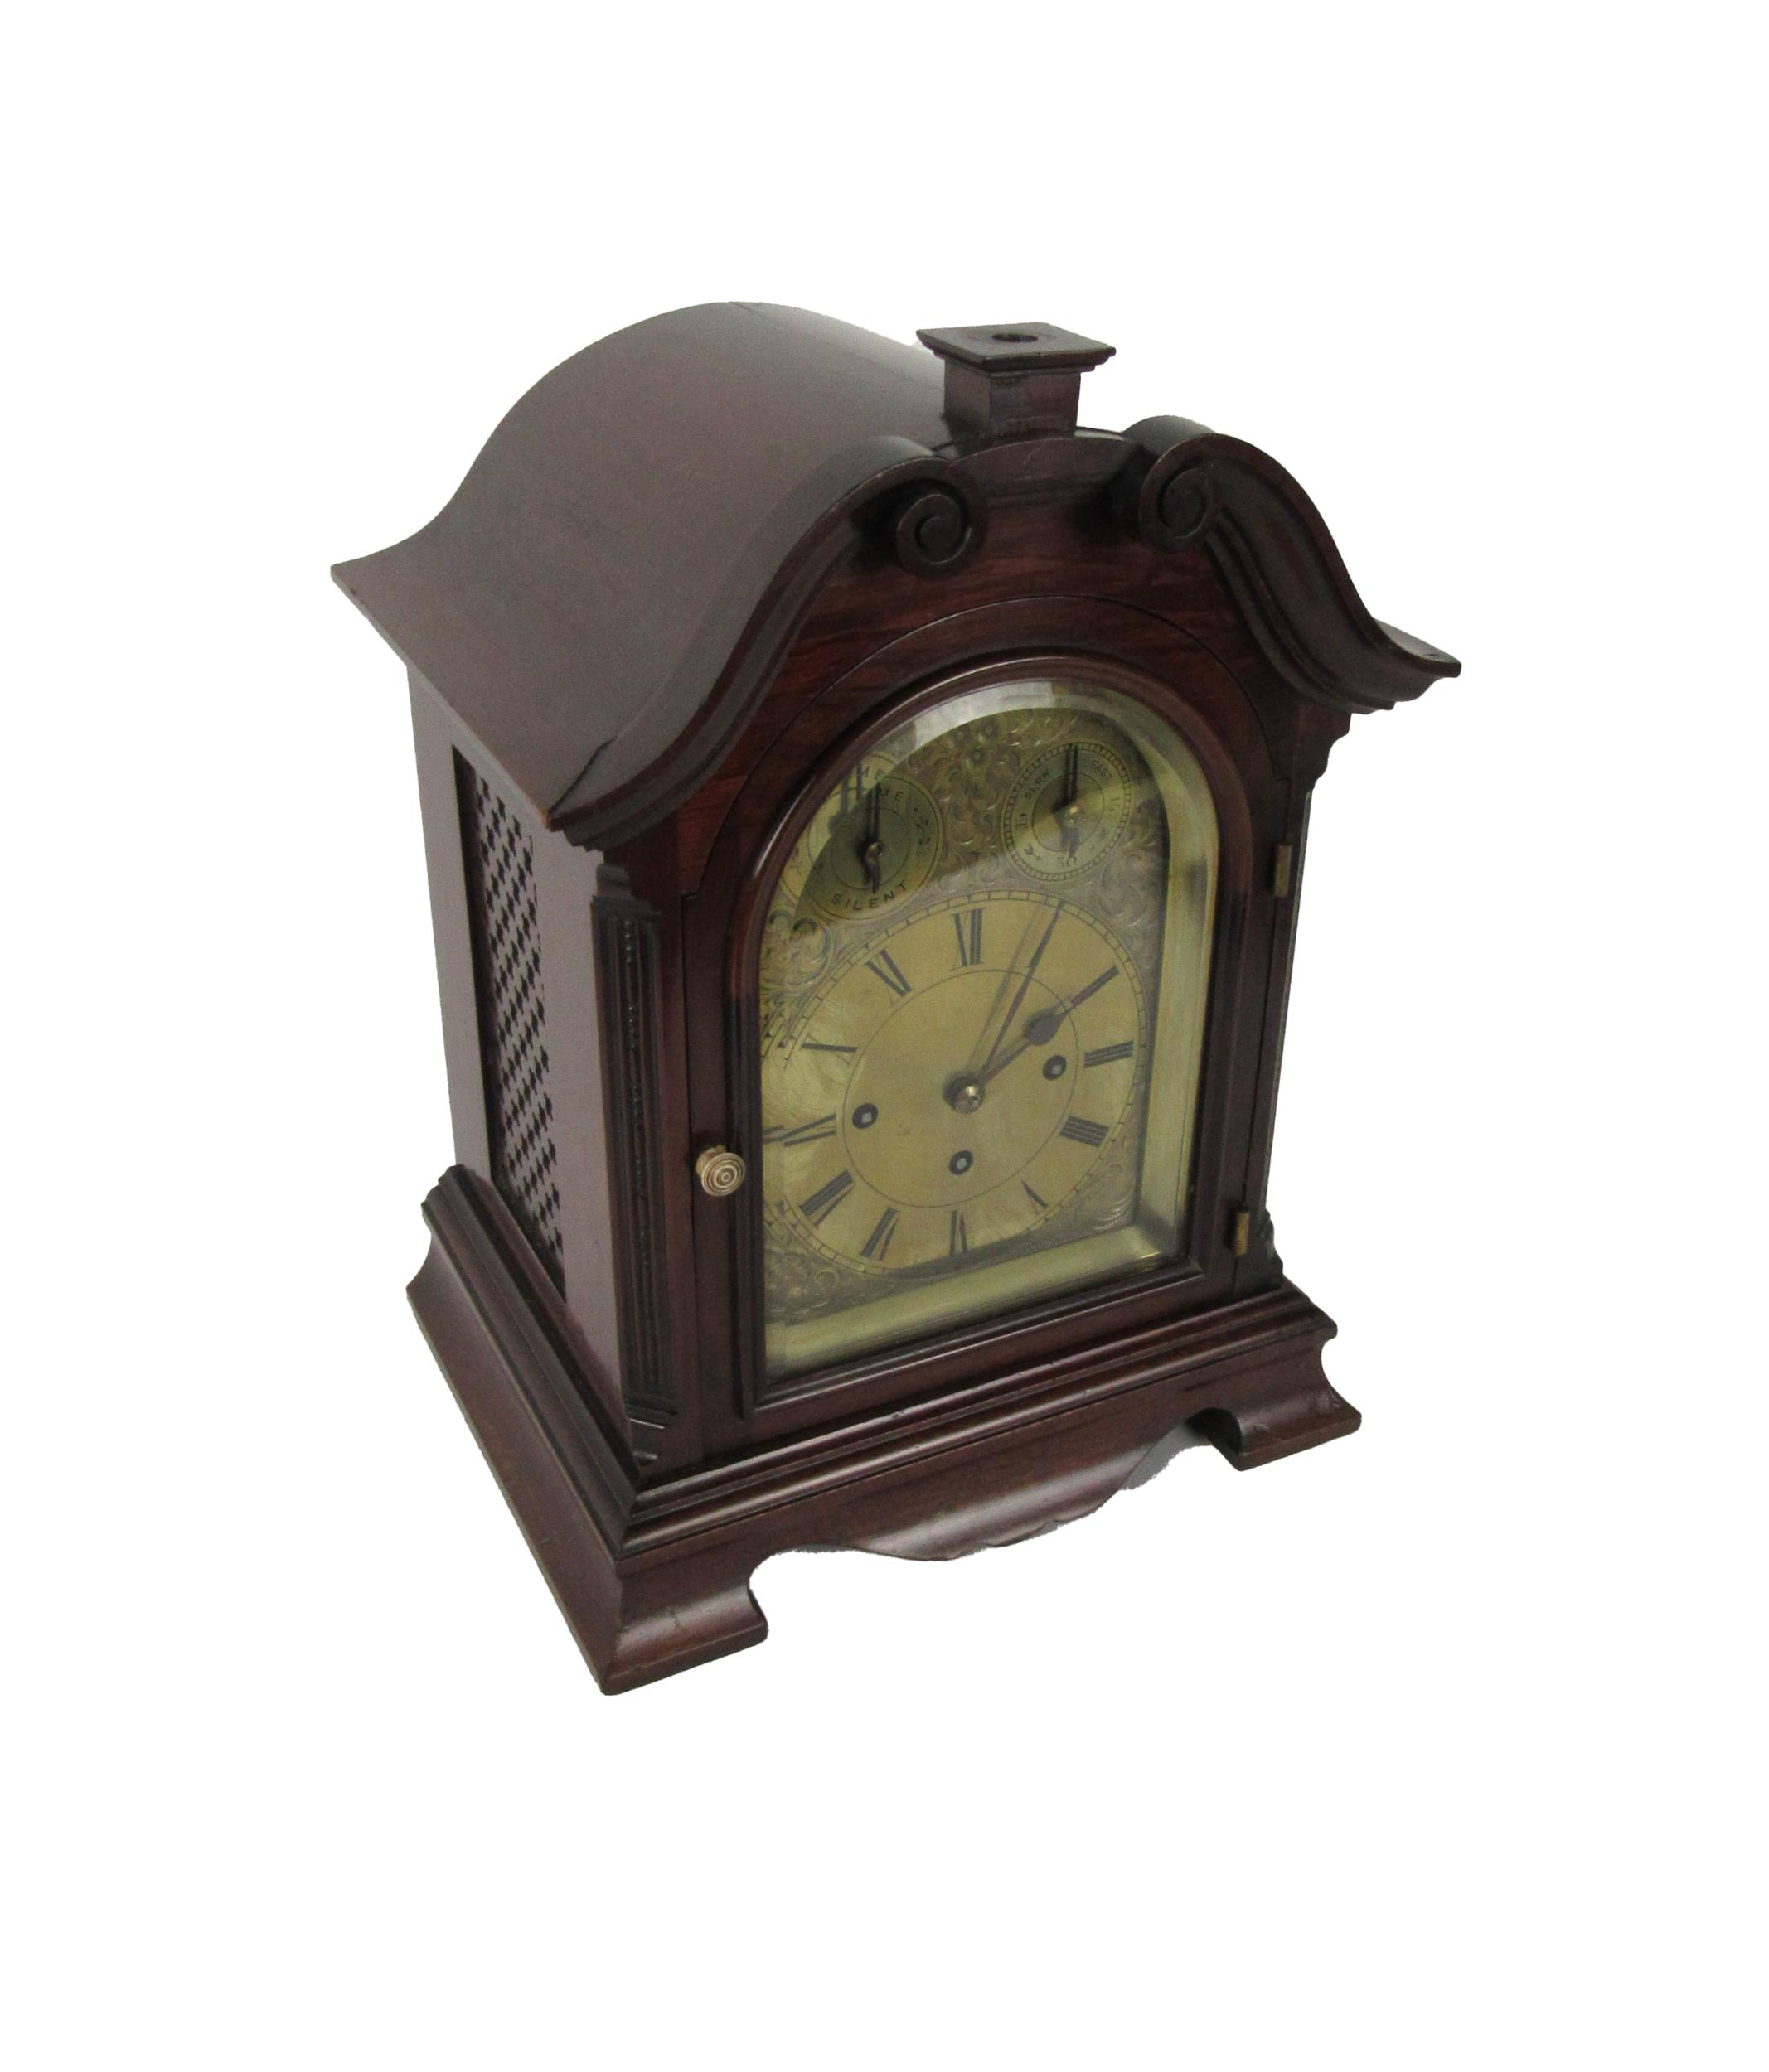 An attractive mahogany cased Mantle Clock, with swan neck pediment over an arched glazed door